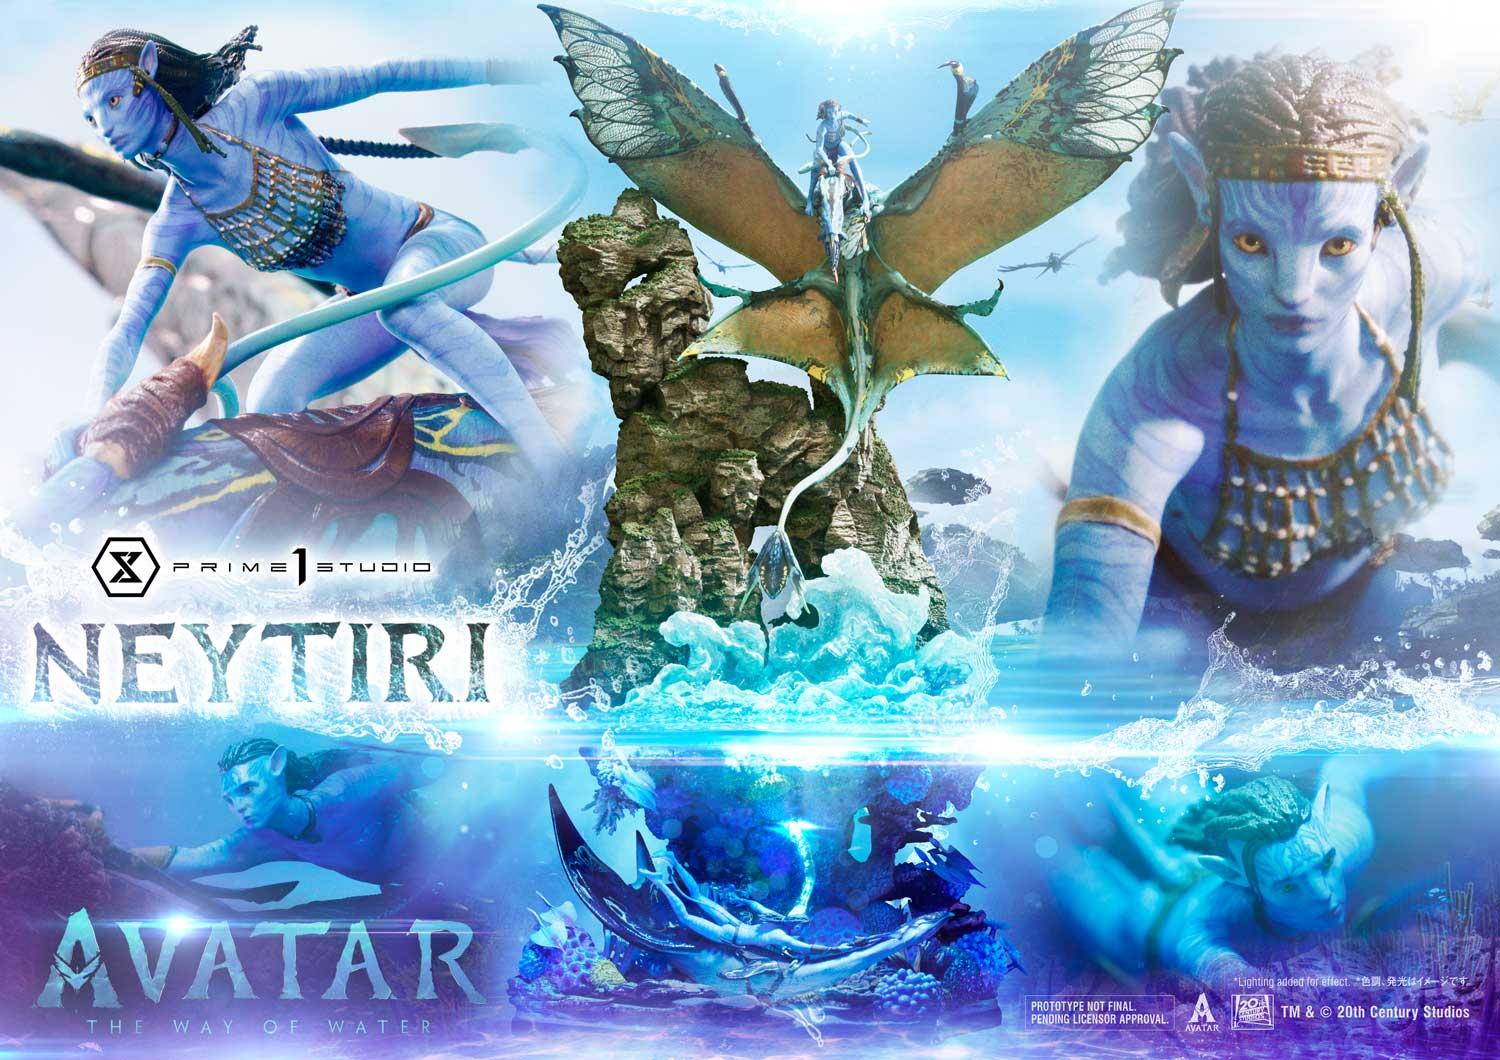 Avatar: The Way Of Water Preorders Have Officially Opened - GameSpot